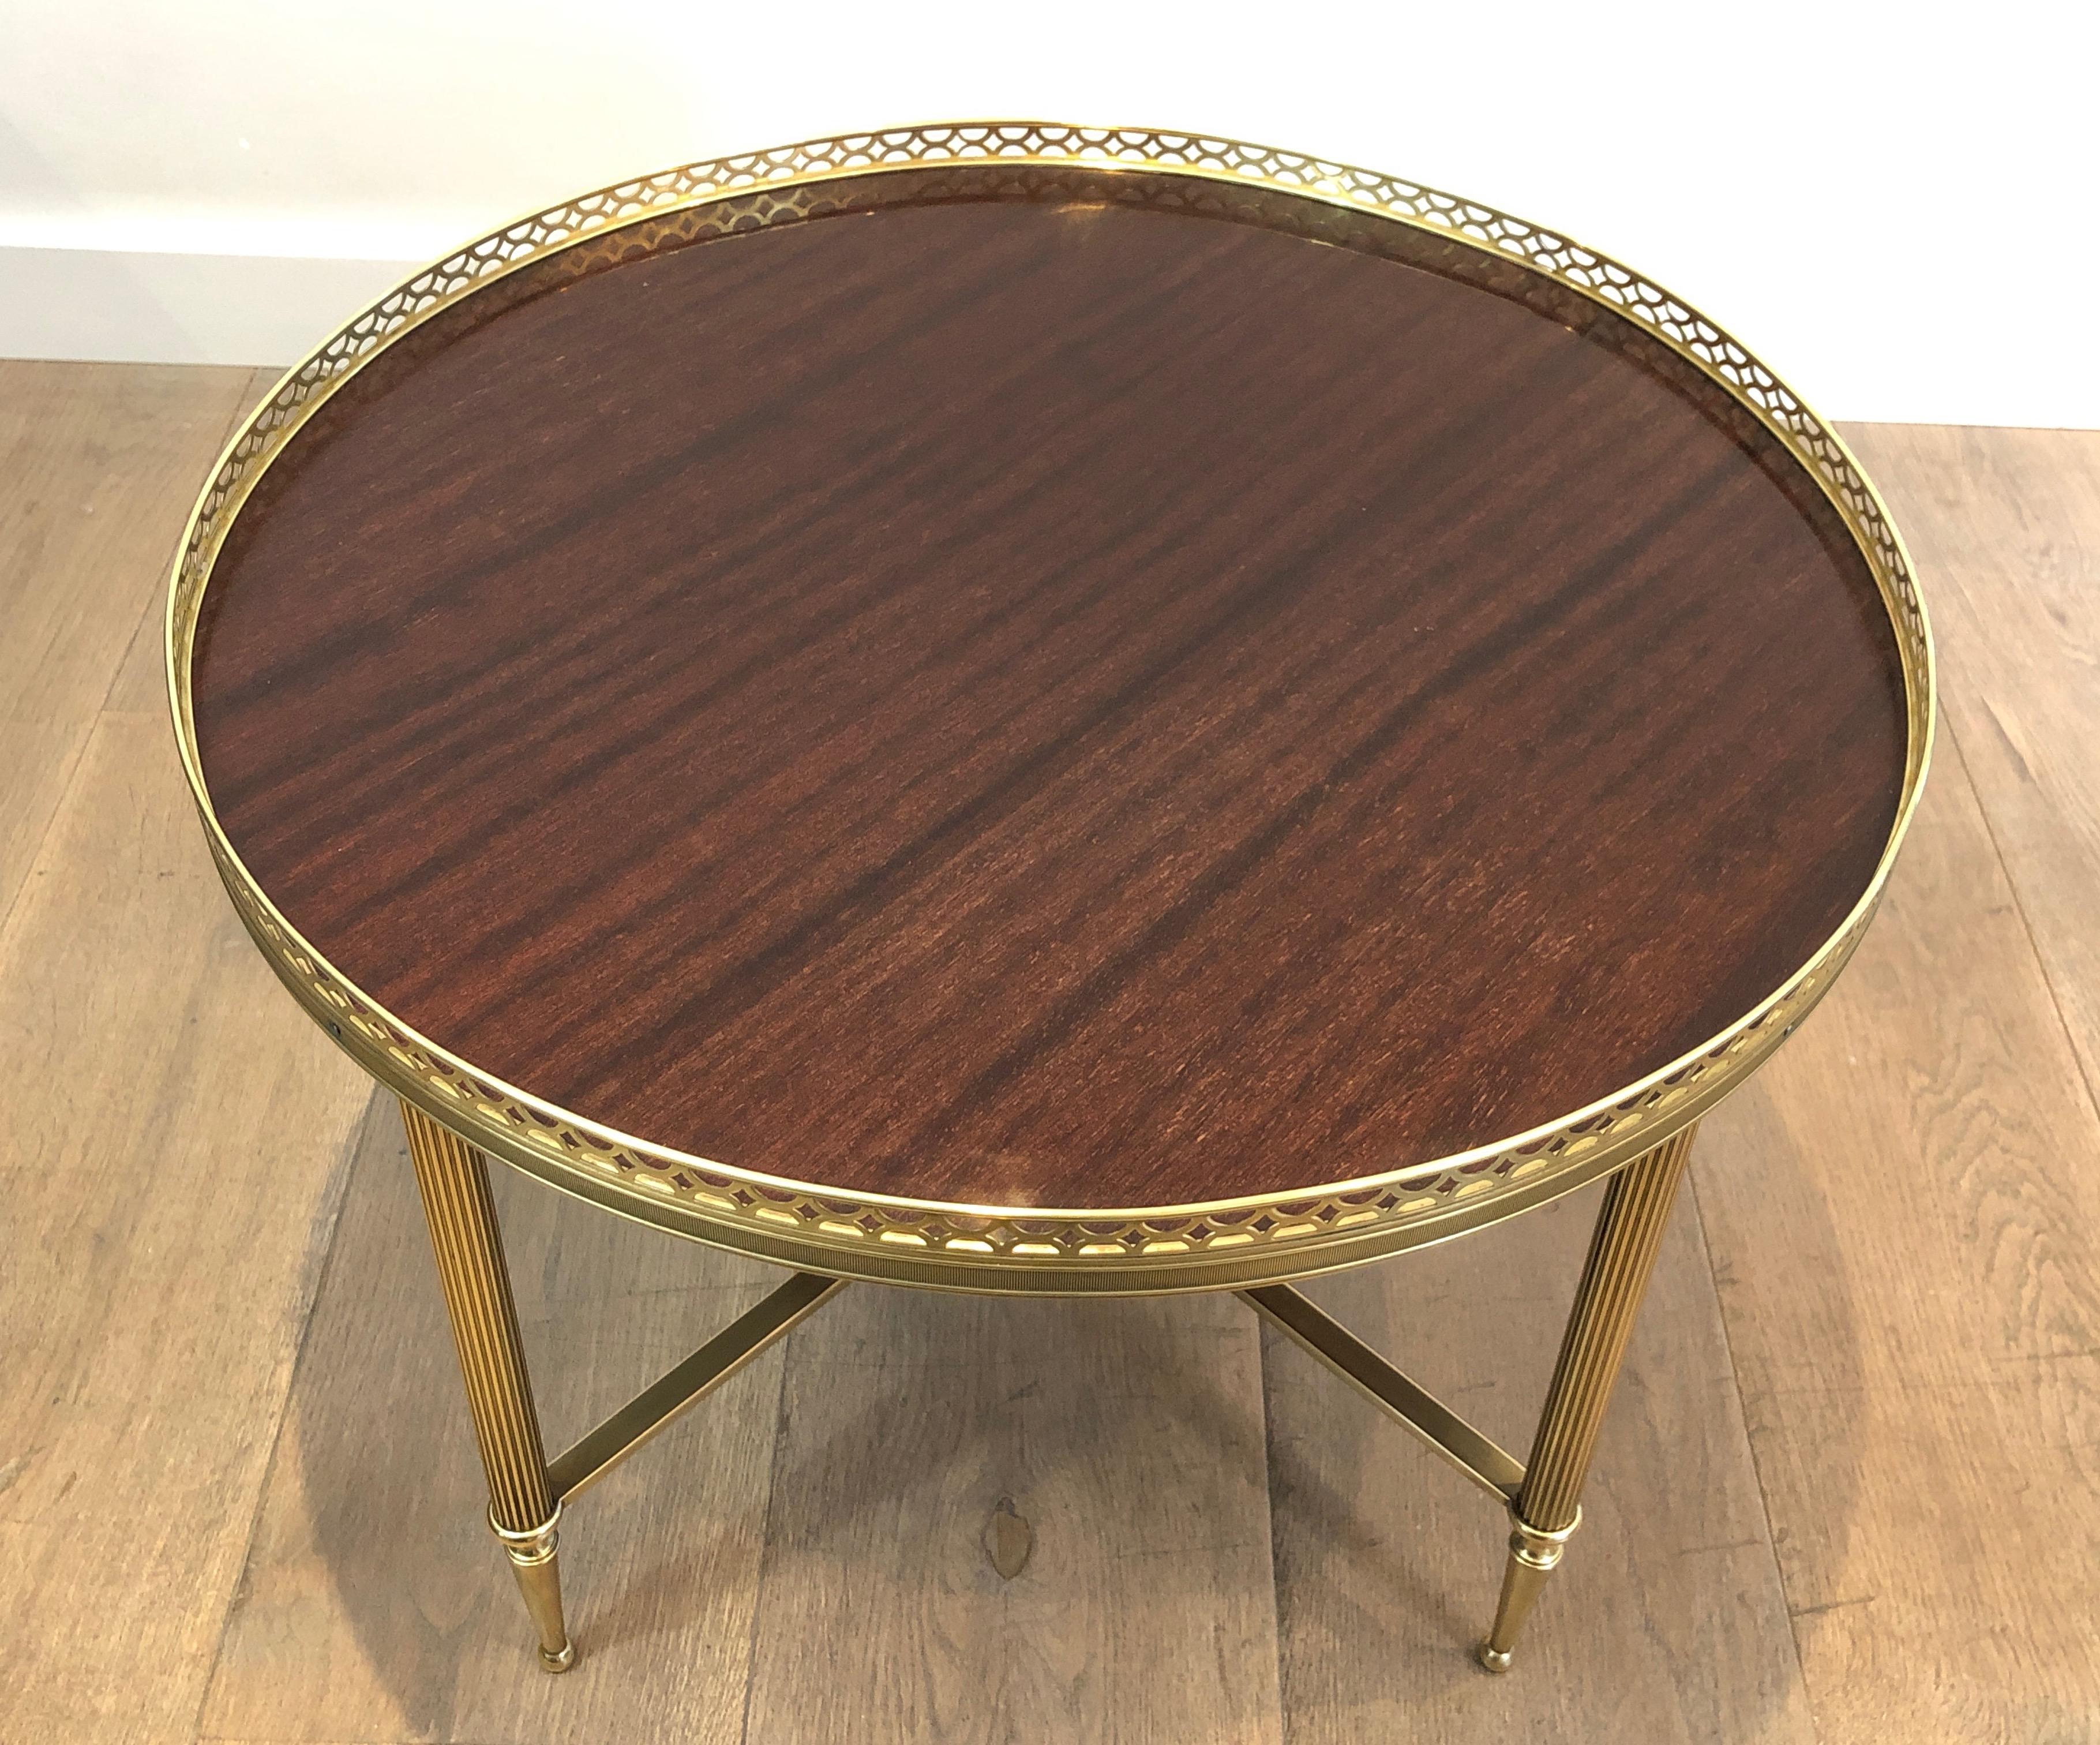 Mid-20th Century Maison Jansen, Neoclassical Brass Round Coffee Table with Mahogany Veneer Top F